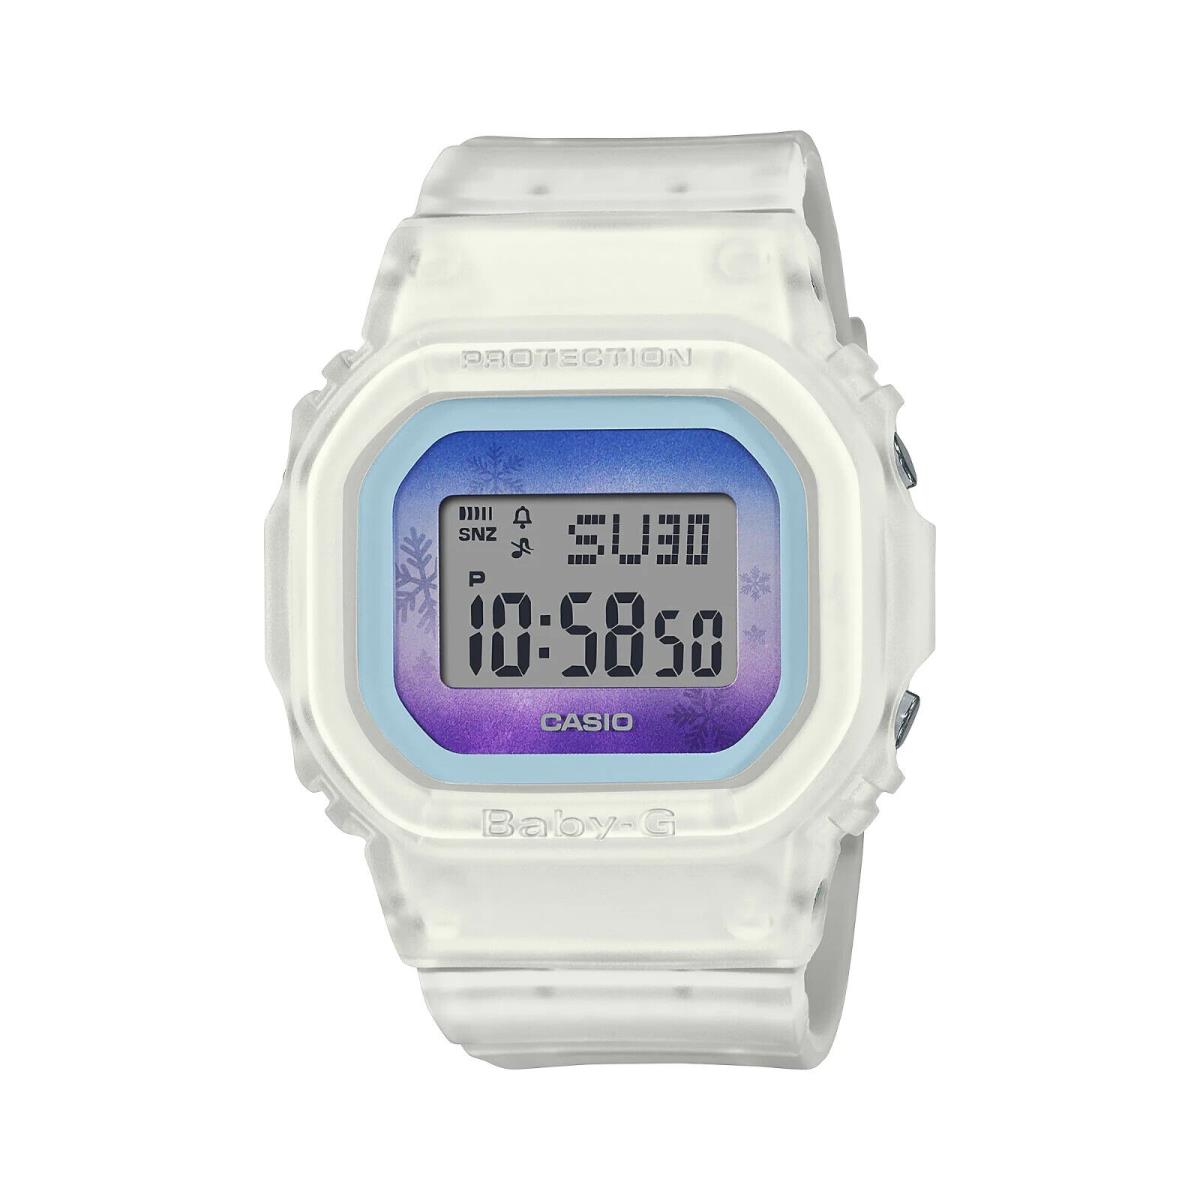 Casio Baby-g Winter Sky Series Translucent White Resin Band Watch BGD560WL-7D